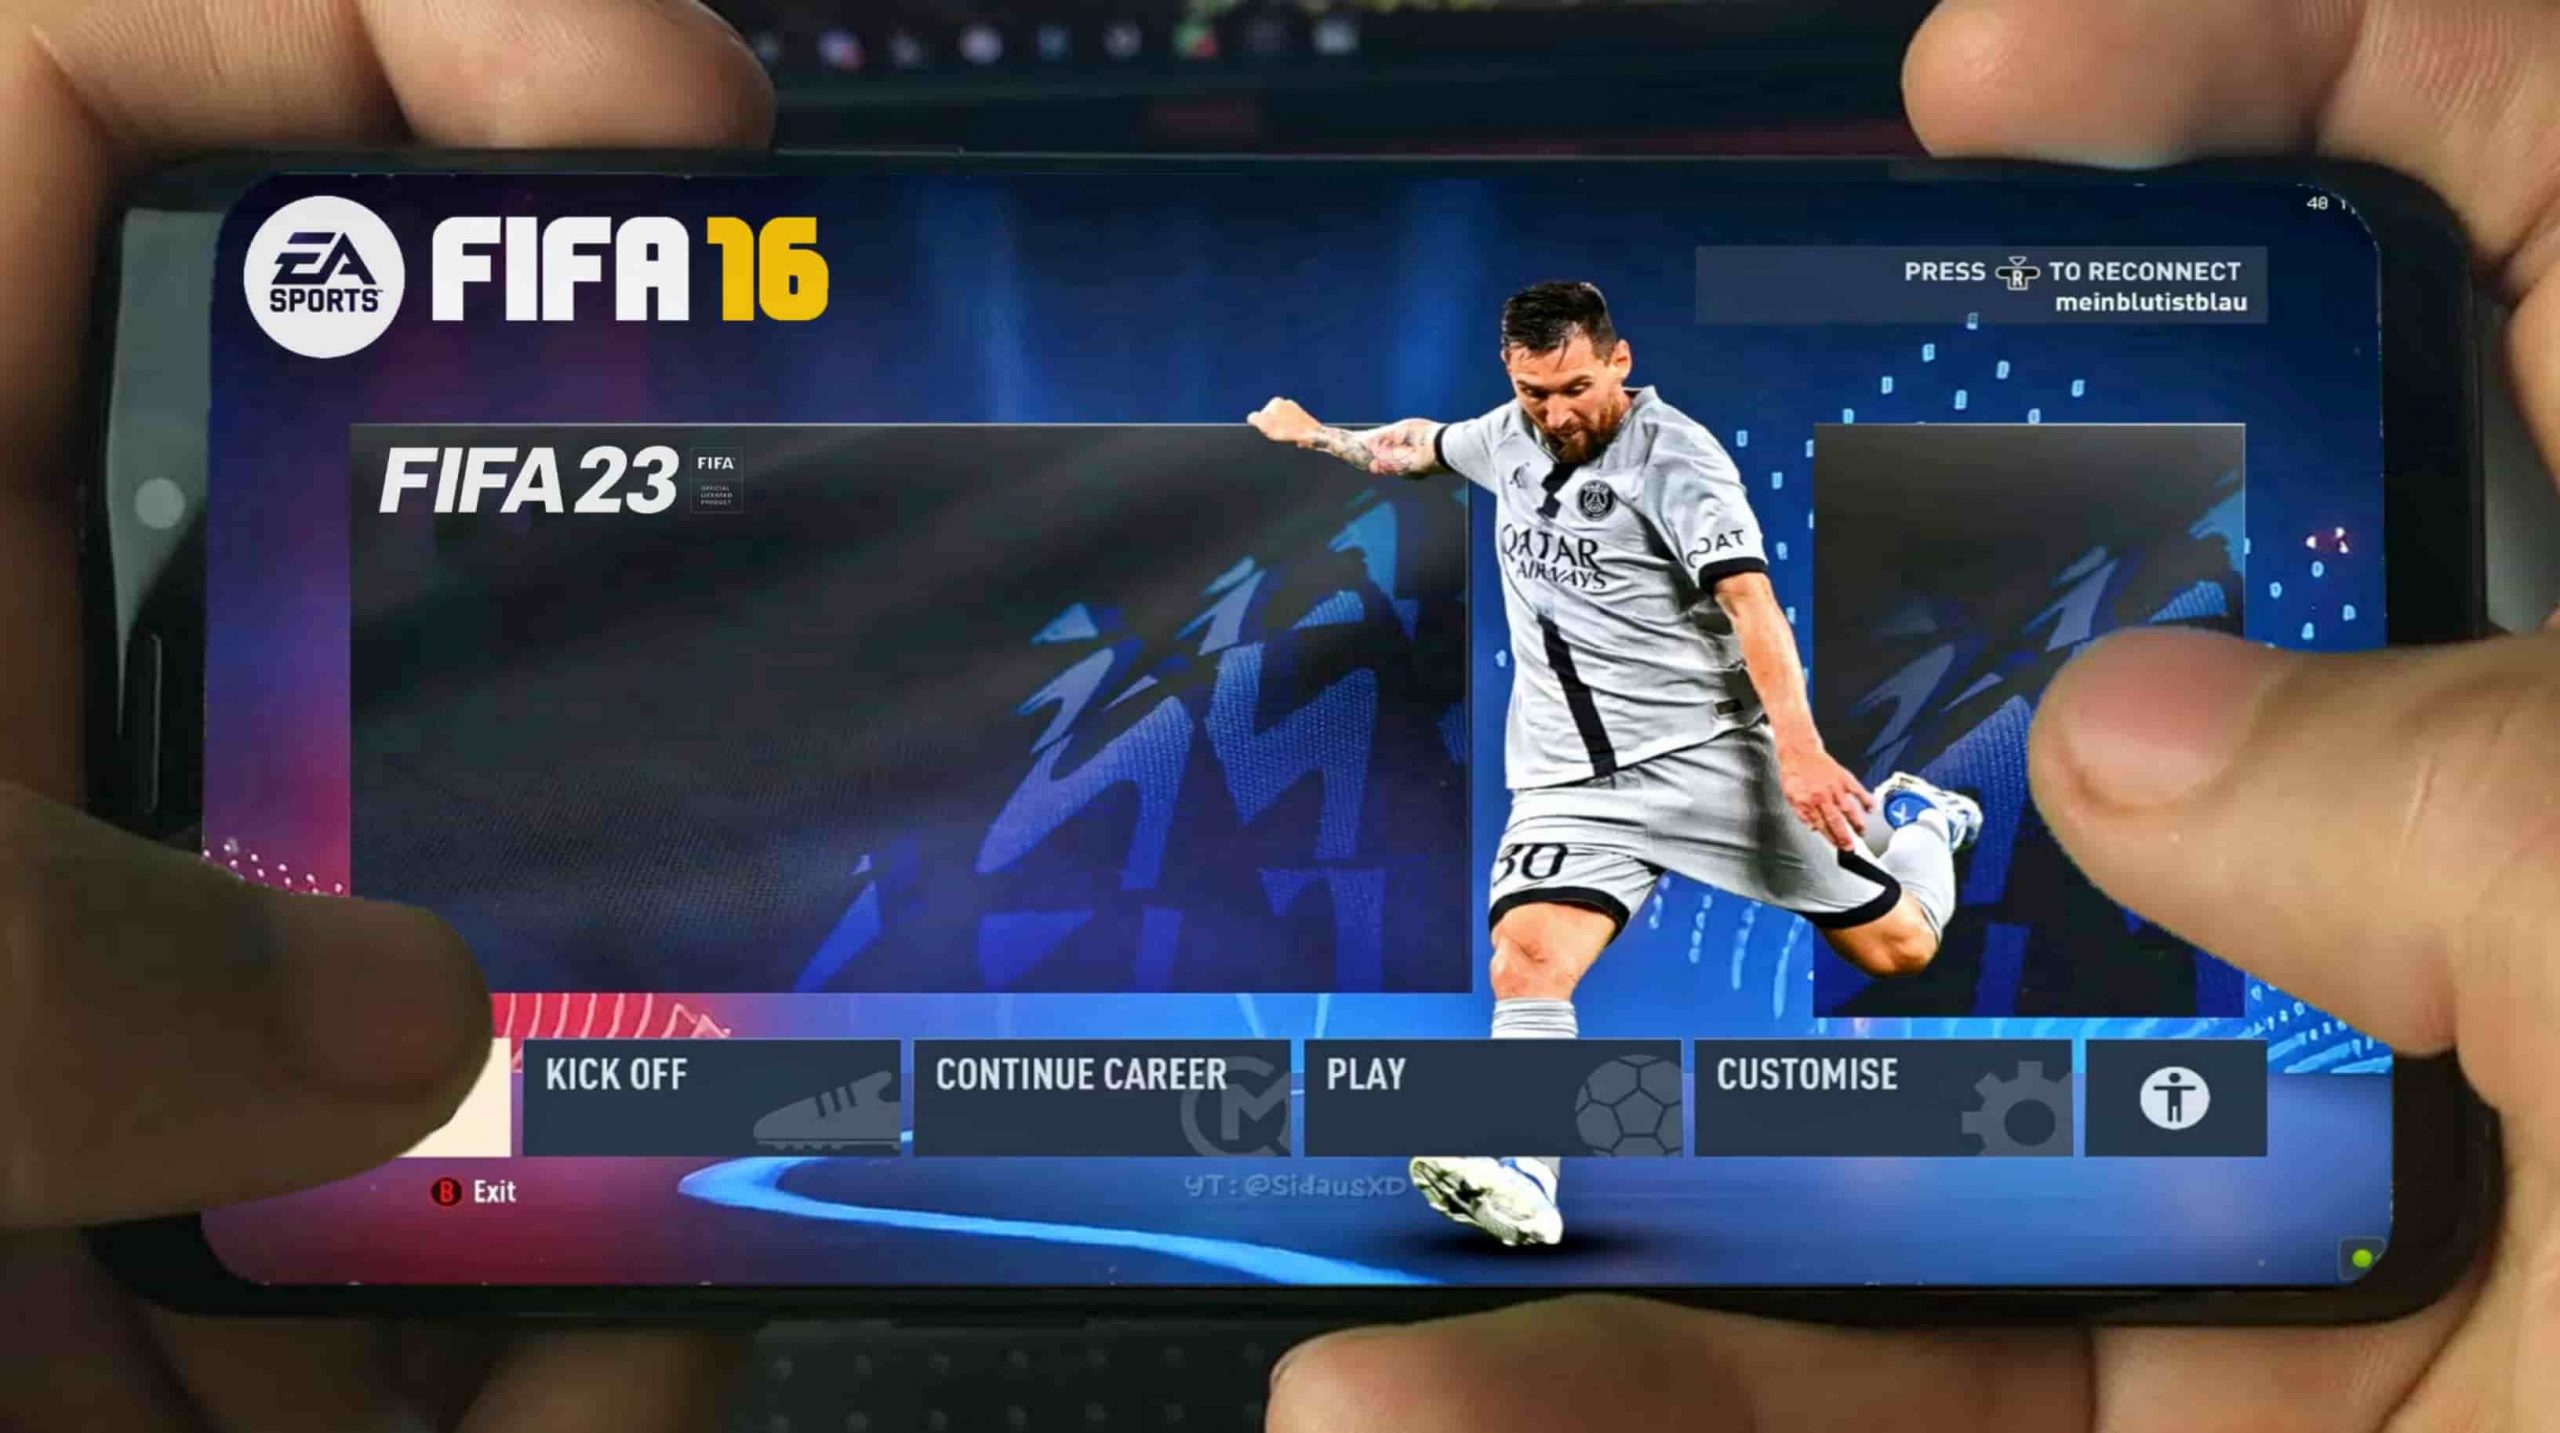 fifa-16-mod-fifa-23-android-offline-free-download-pesgames